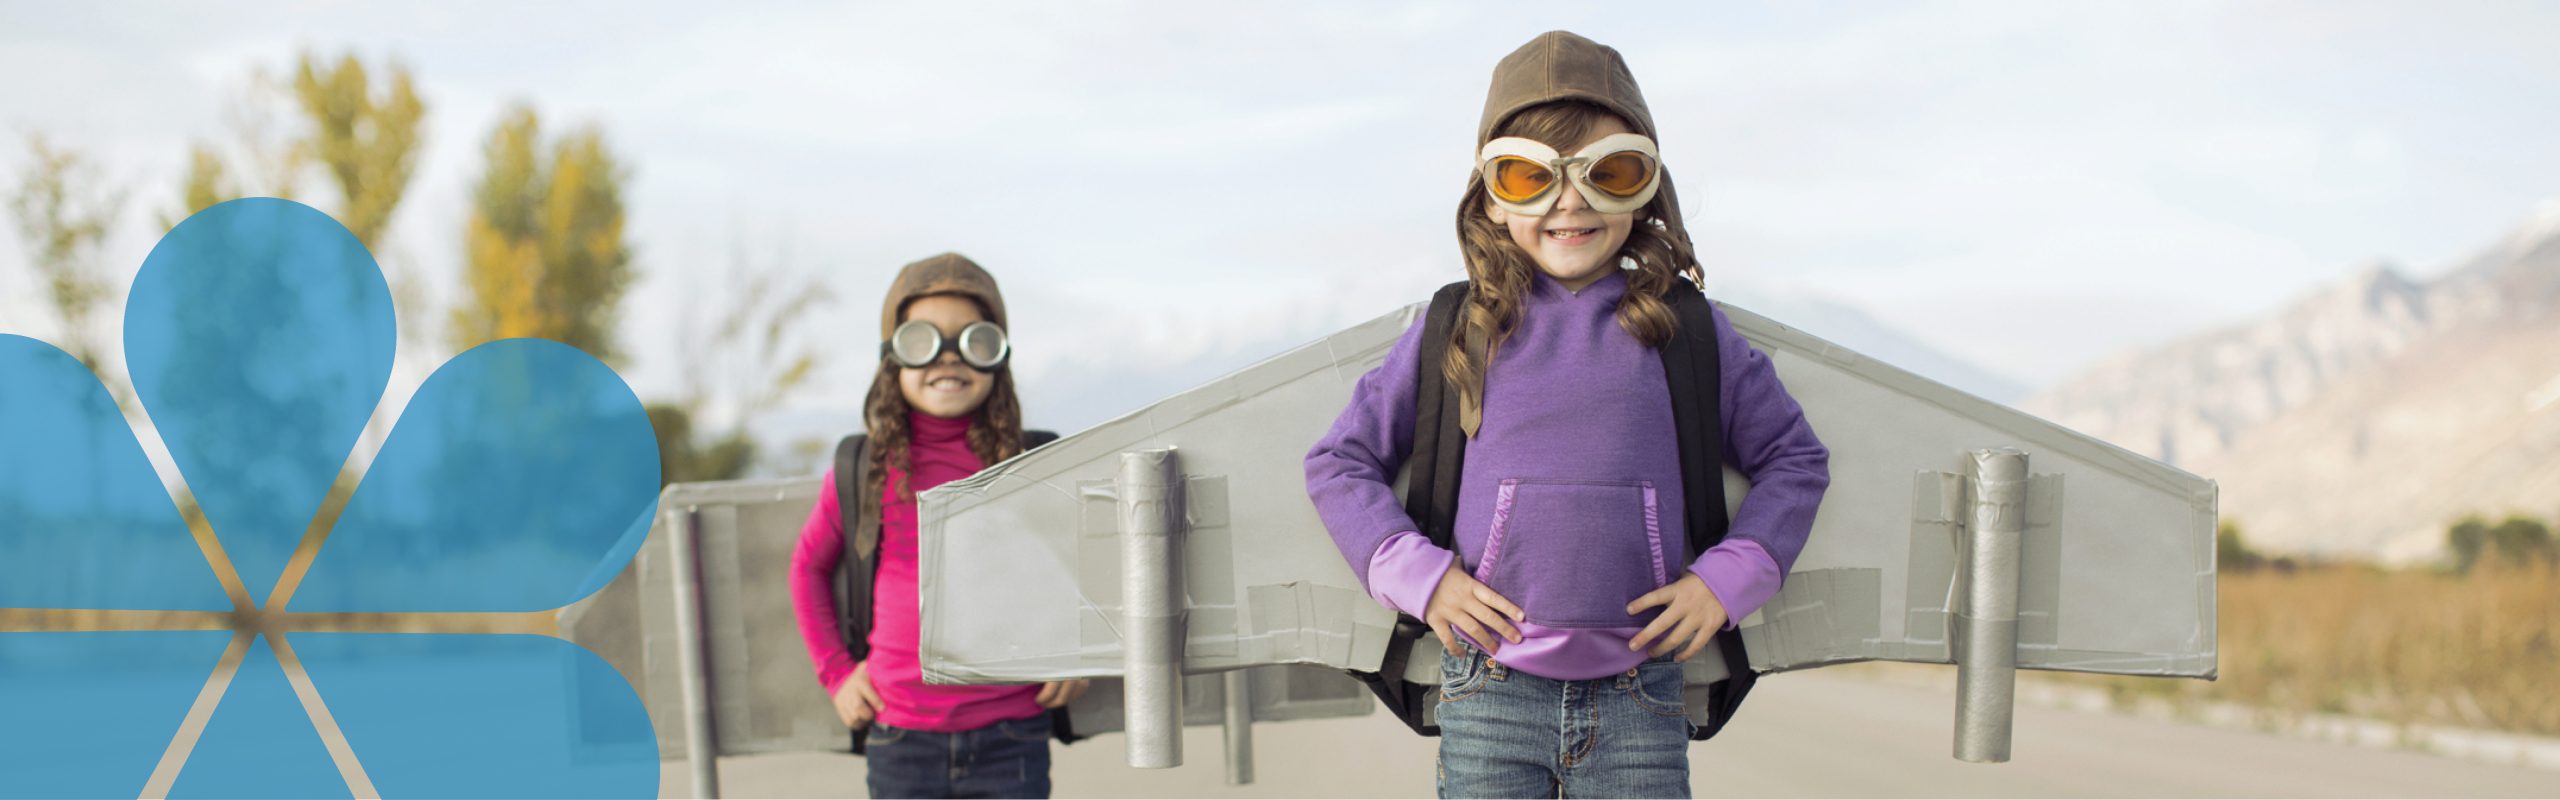 A picture of 2 young girls wearing old fashion flying hats and goggles. They have home made carboard aeroplane wings on. They look happy, smiling and confident like they are going to take on the world.